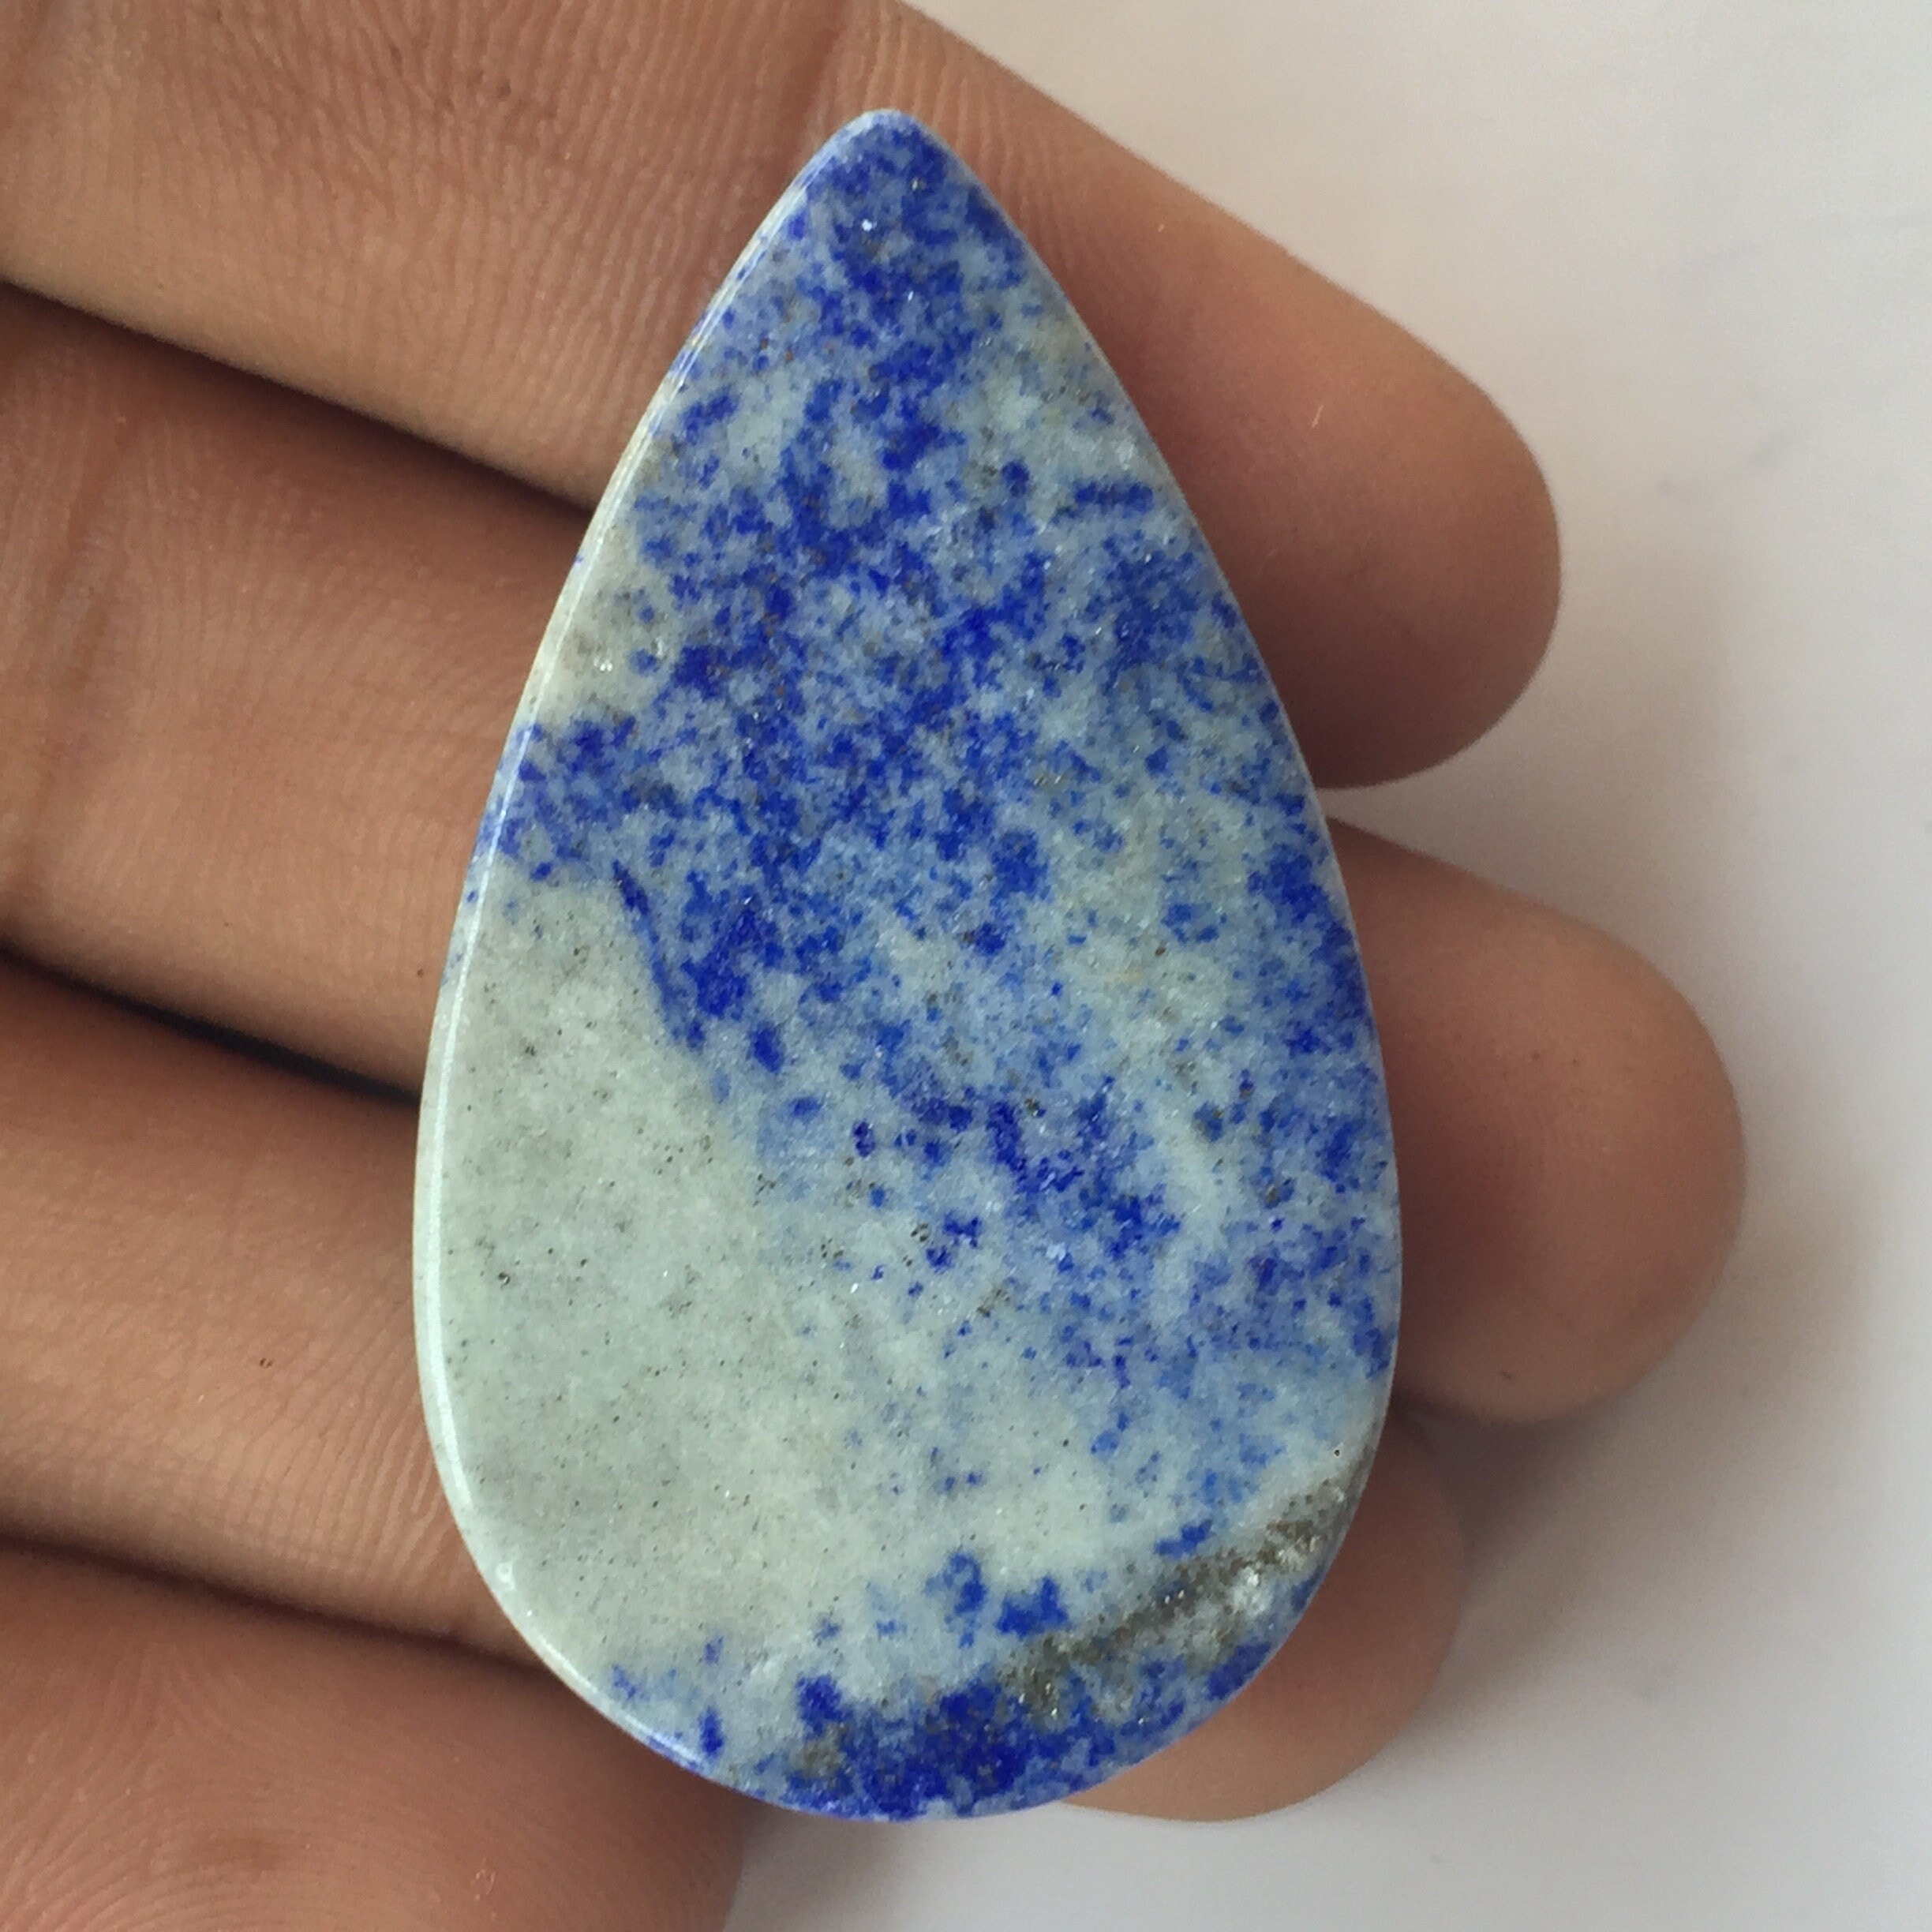 Blue Lapis Lazuli Loose Gemstone 33.90 Cts Pear Shape Best For Silver Amazing Top Quality Blue Lapis Lazuli Cabochon Wire Wrap Jewelry